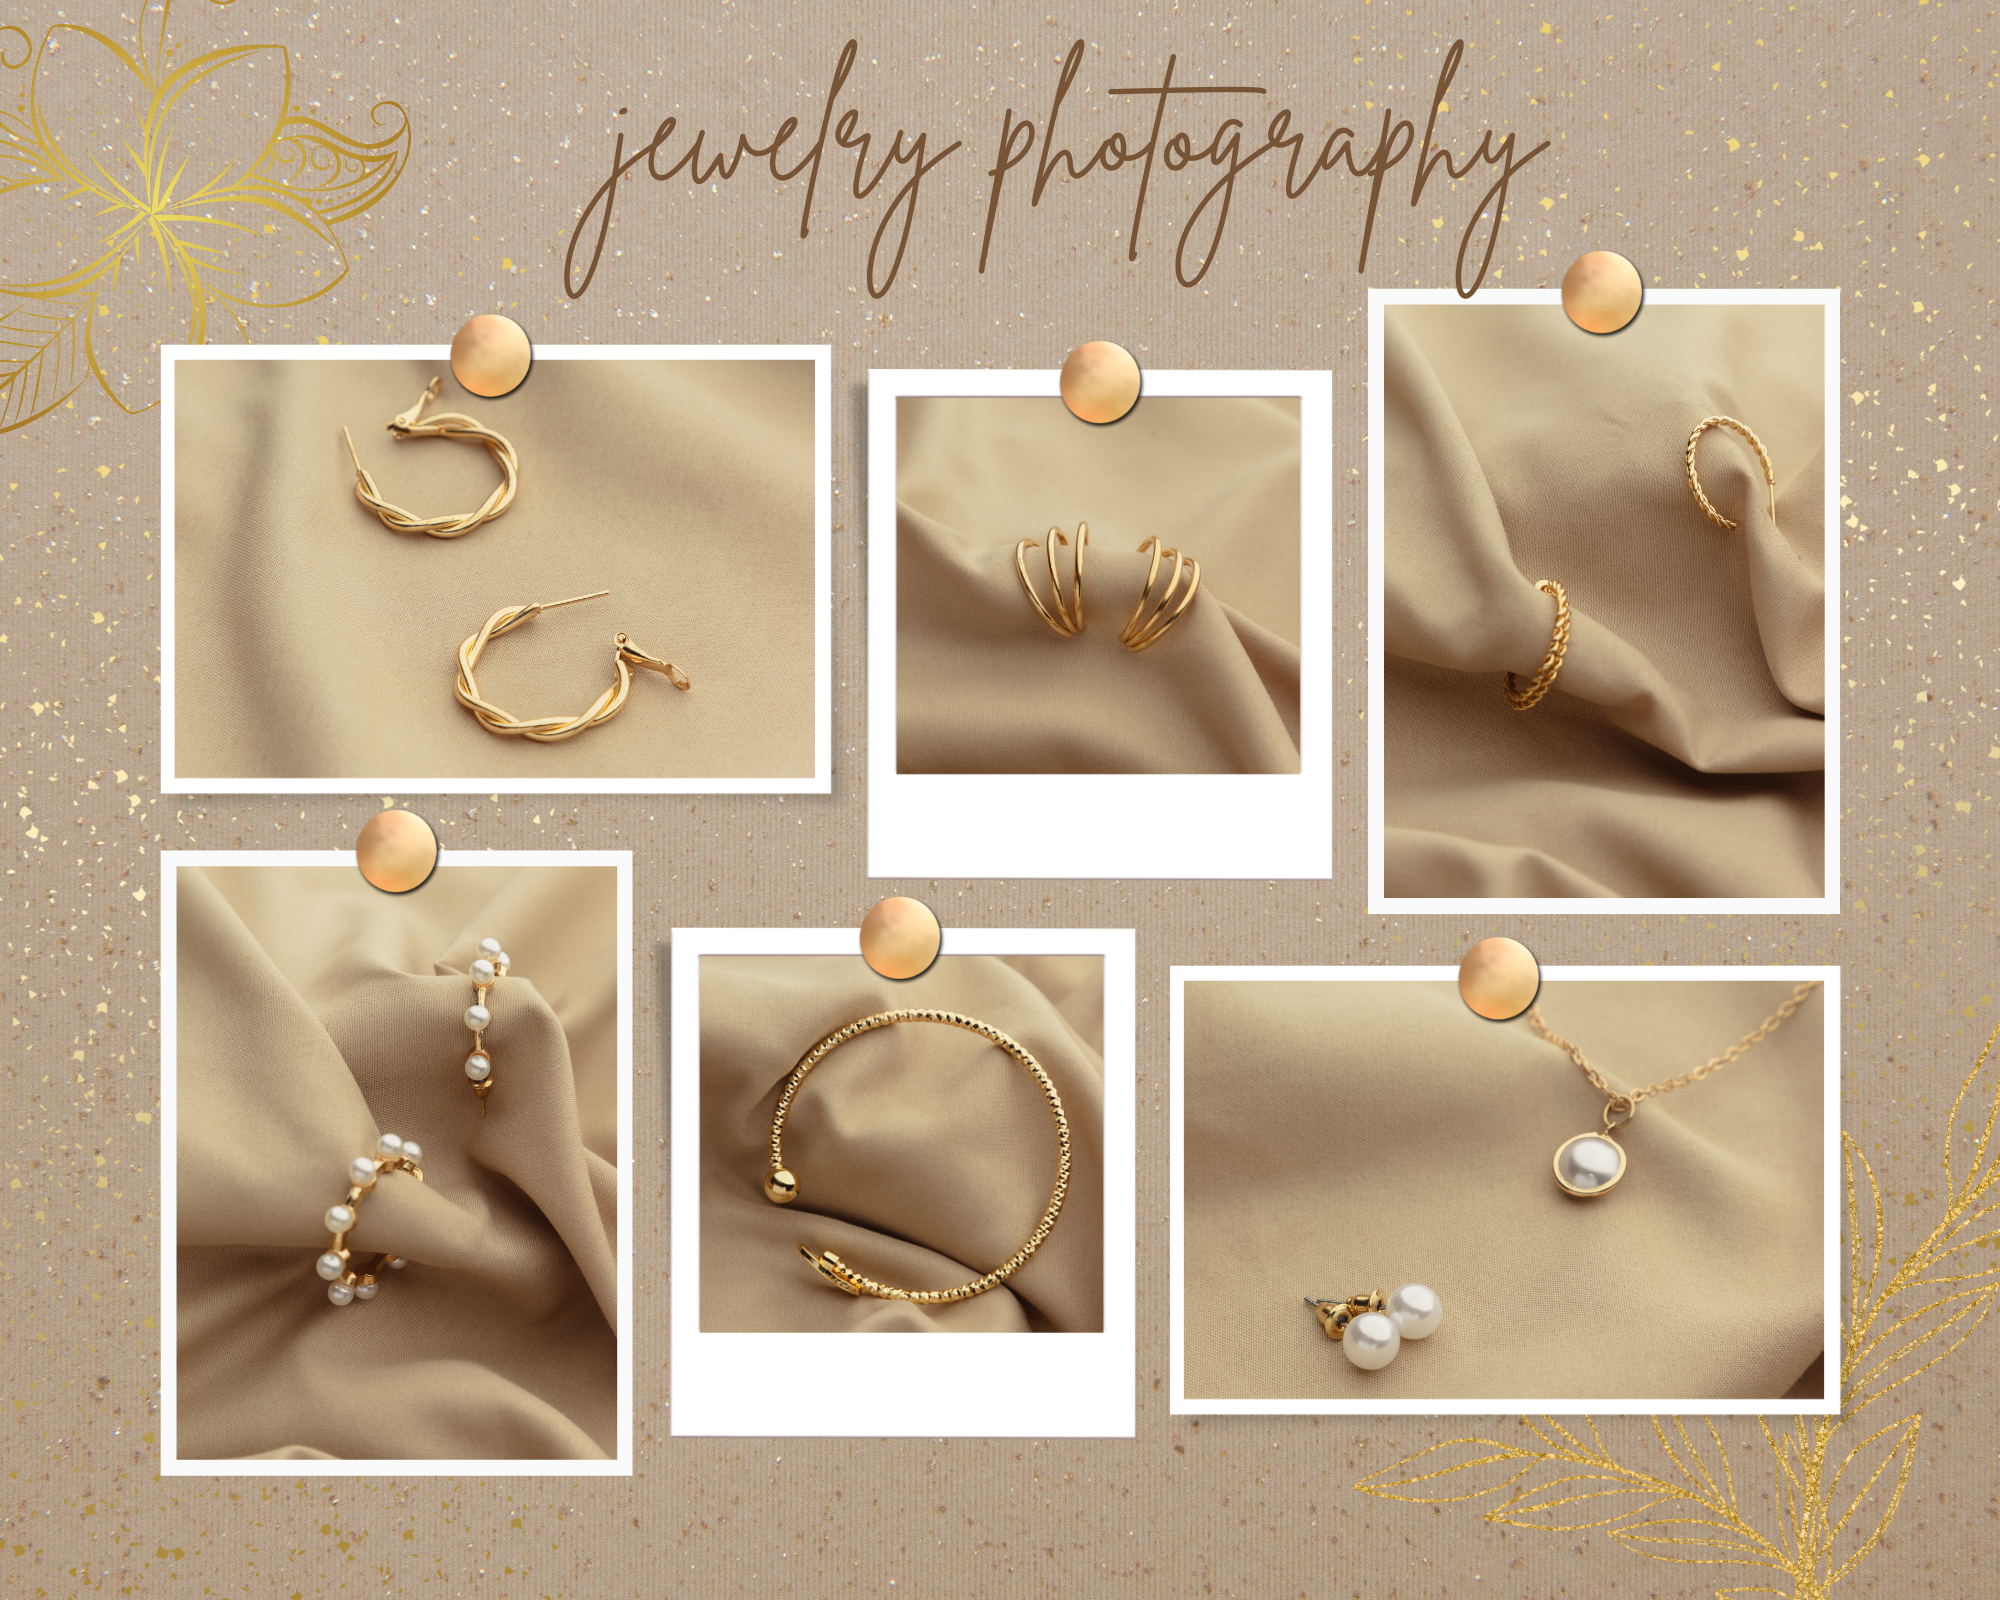 JEWELRY PRODUCT PHOTOGRAPHY IN JAIPUR